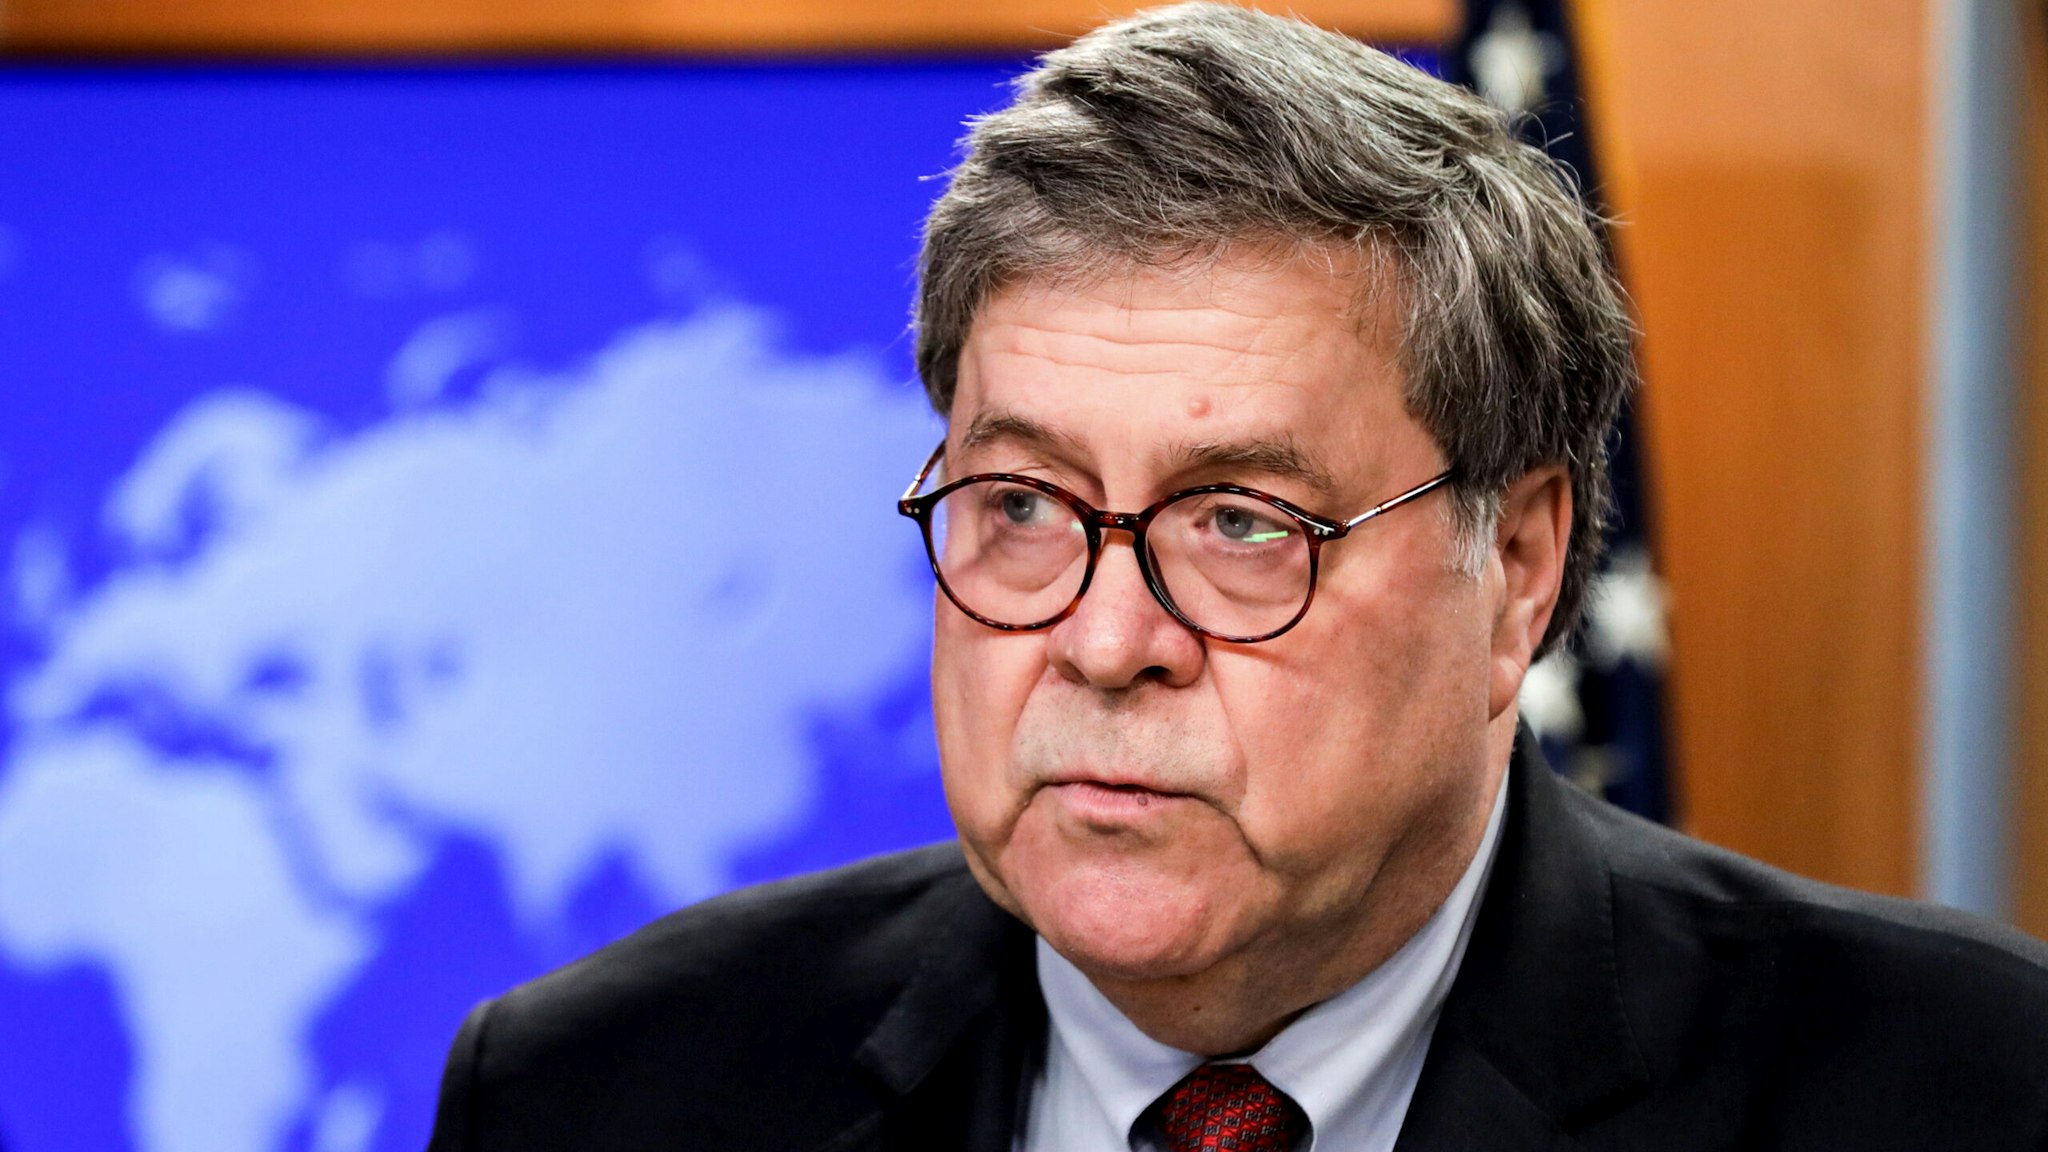 US Attorney General William Barr speaks at a joint news conference on the International Criminal Court, at the State Department in Washington, DC, on June 11, 2020. - The US on Thursday accused Russia of "manipulating" the International Criminal Court as President Donald Trump announced sanctions against court officials who target US troops. "Foreign powers like Russia are also manipulating the ICC in pursuit of their own agenda," Barr said.